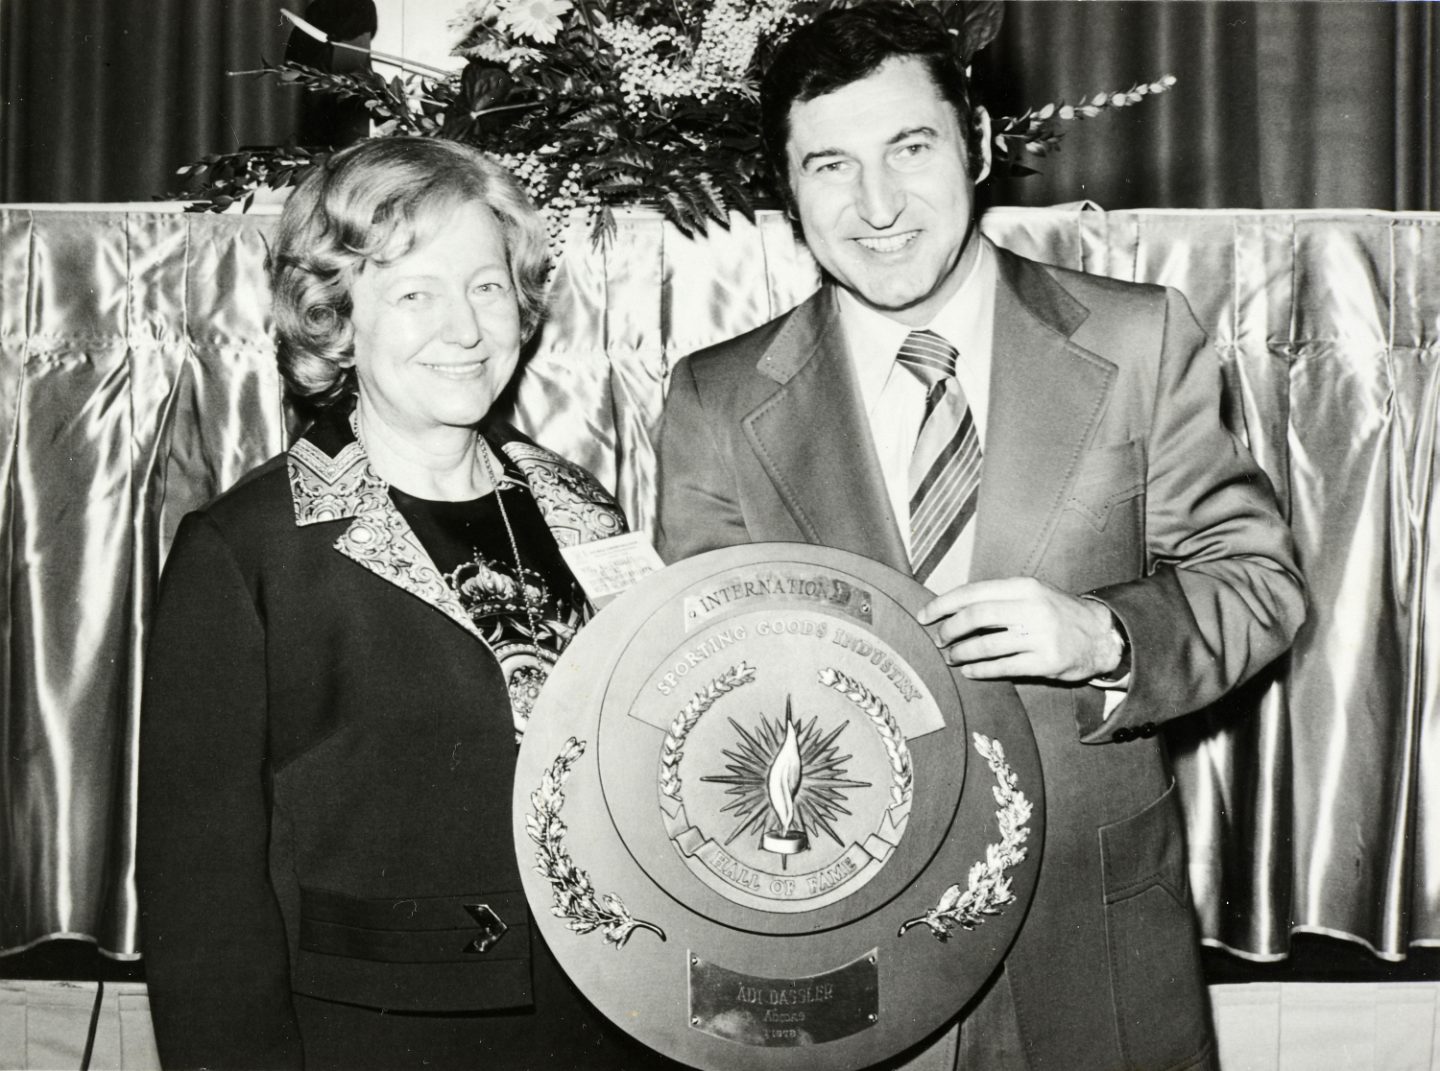 Käthe Dassler with her eldest son Horst in 1978. They ran the company together for several years after Adolf Dassler’s death.